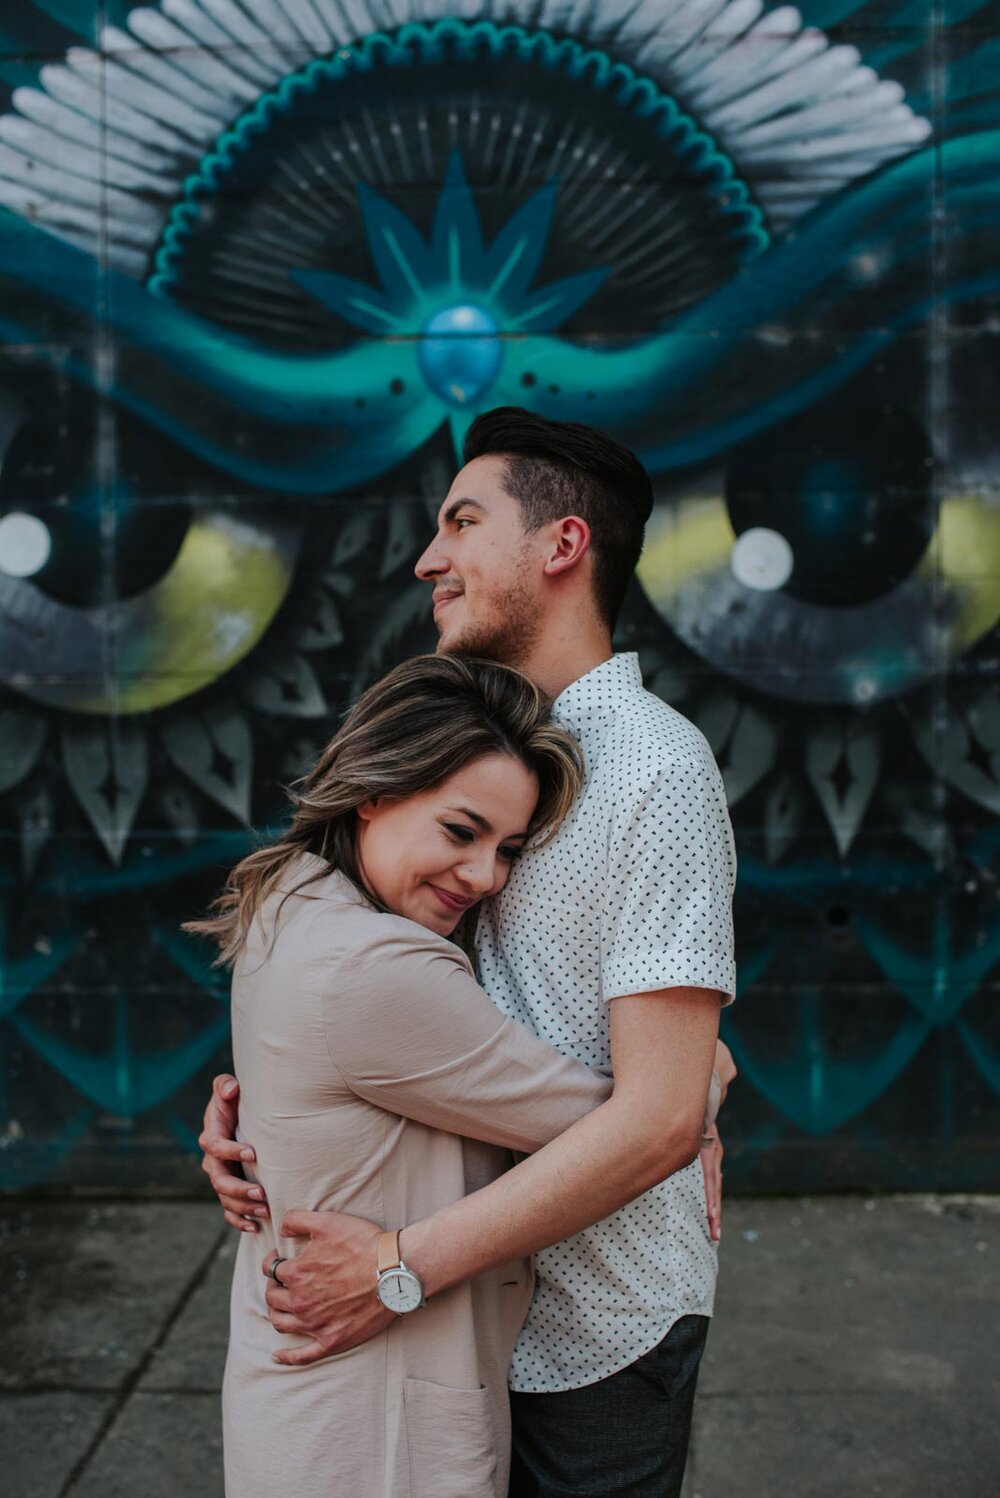 Man and woman embracing before a mural in Richmond VA Carly Romeo engagement photography (Copy)